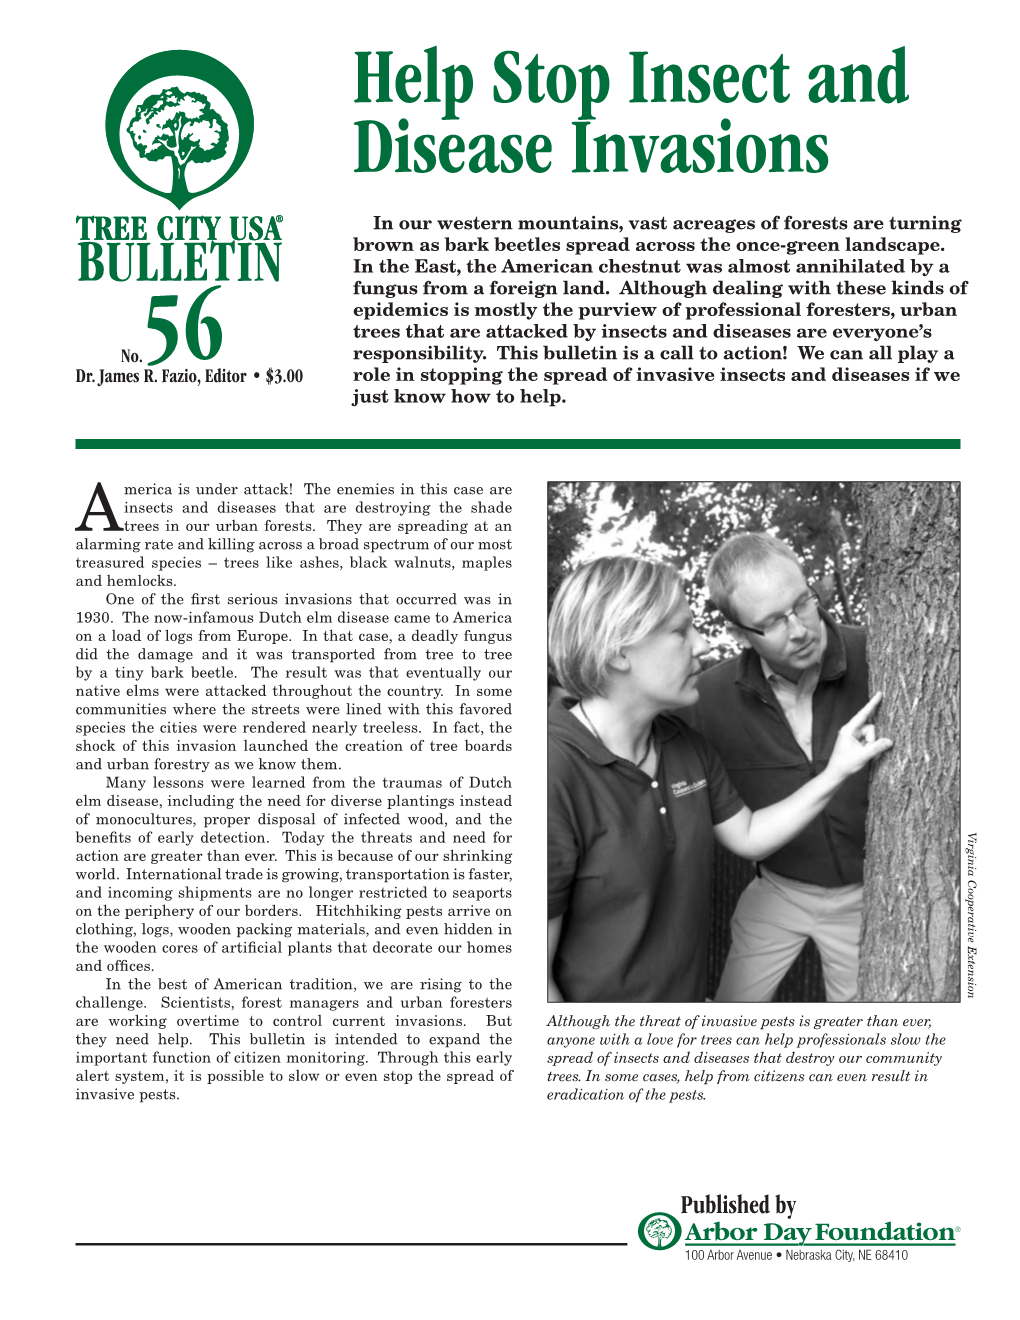 Help Stop Insect and Disease Invasions